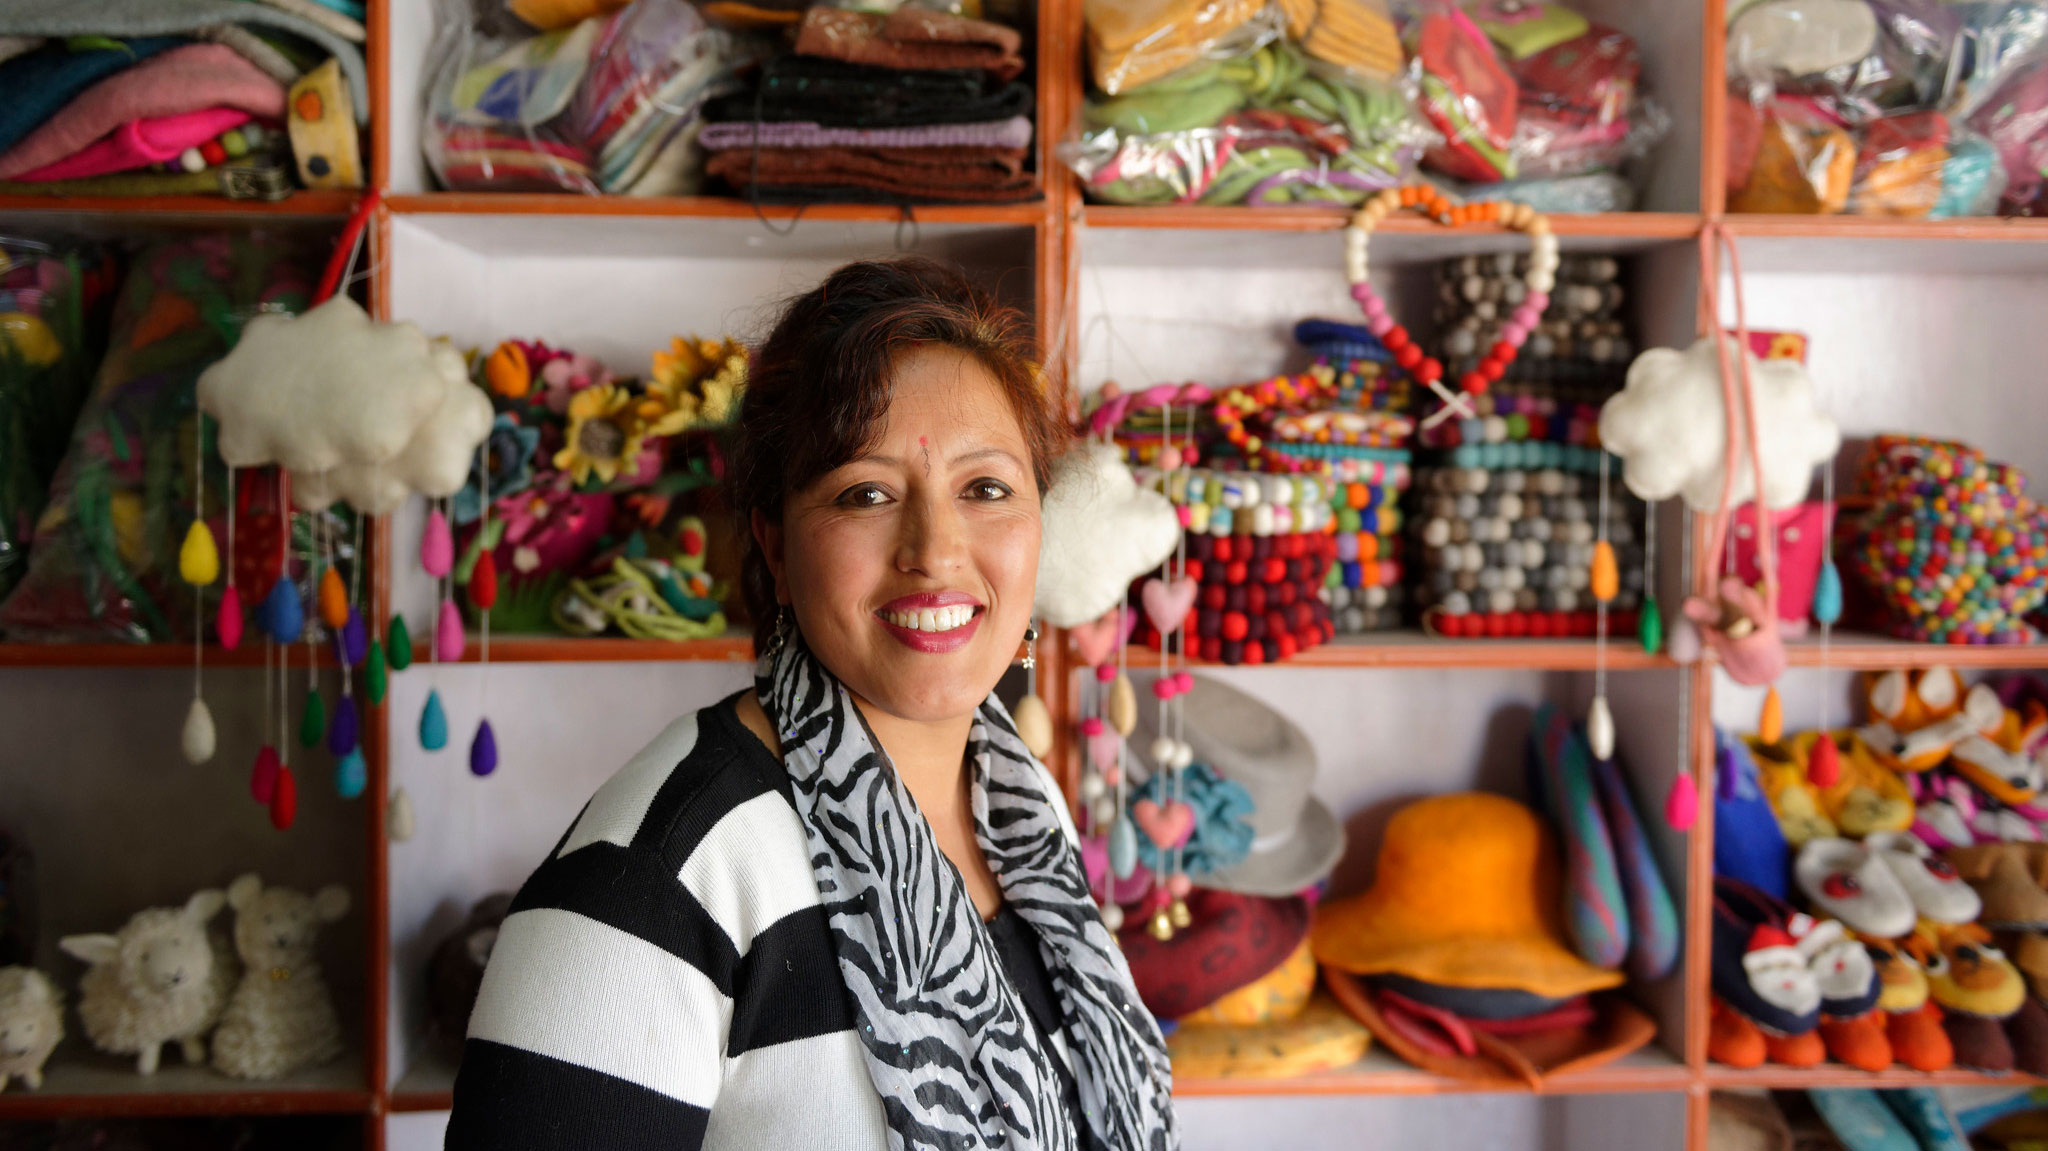 Lady owner of shop in Nepal with shelves of colourful handcrafted items 